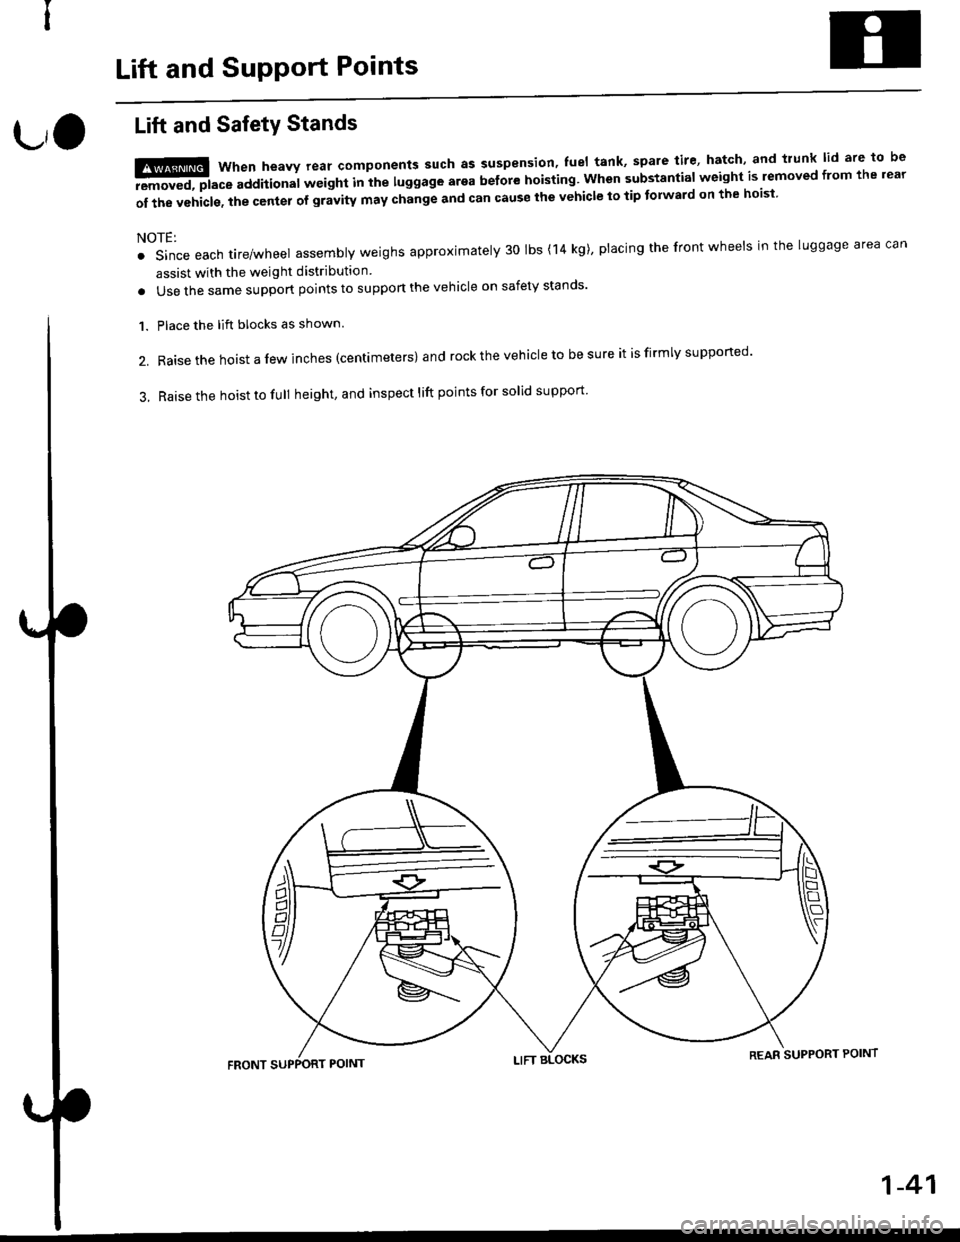 HONDA CIVIC 1998 6.G Service Manual Lift and SupPort Points
L,O
Lift and SafetY Stands
t!ffi when heavv rear components such as suspension fuel tank spare tire hatch and trunk lid are to be
-aEremoved, place additional wetght Inihe 